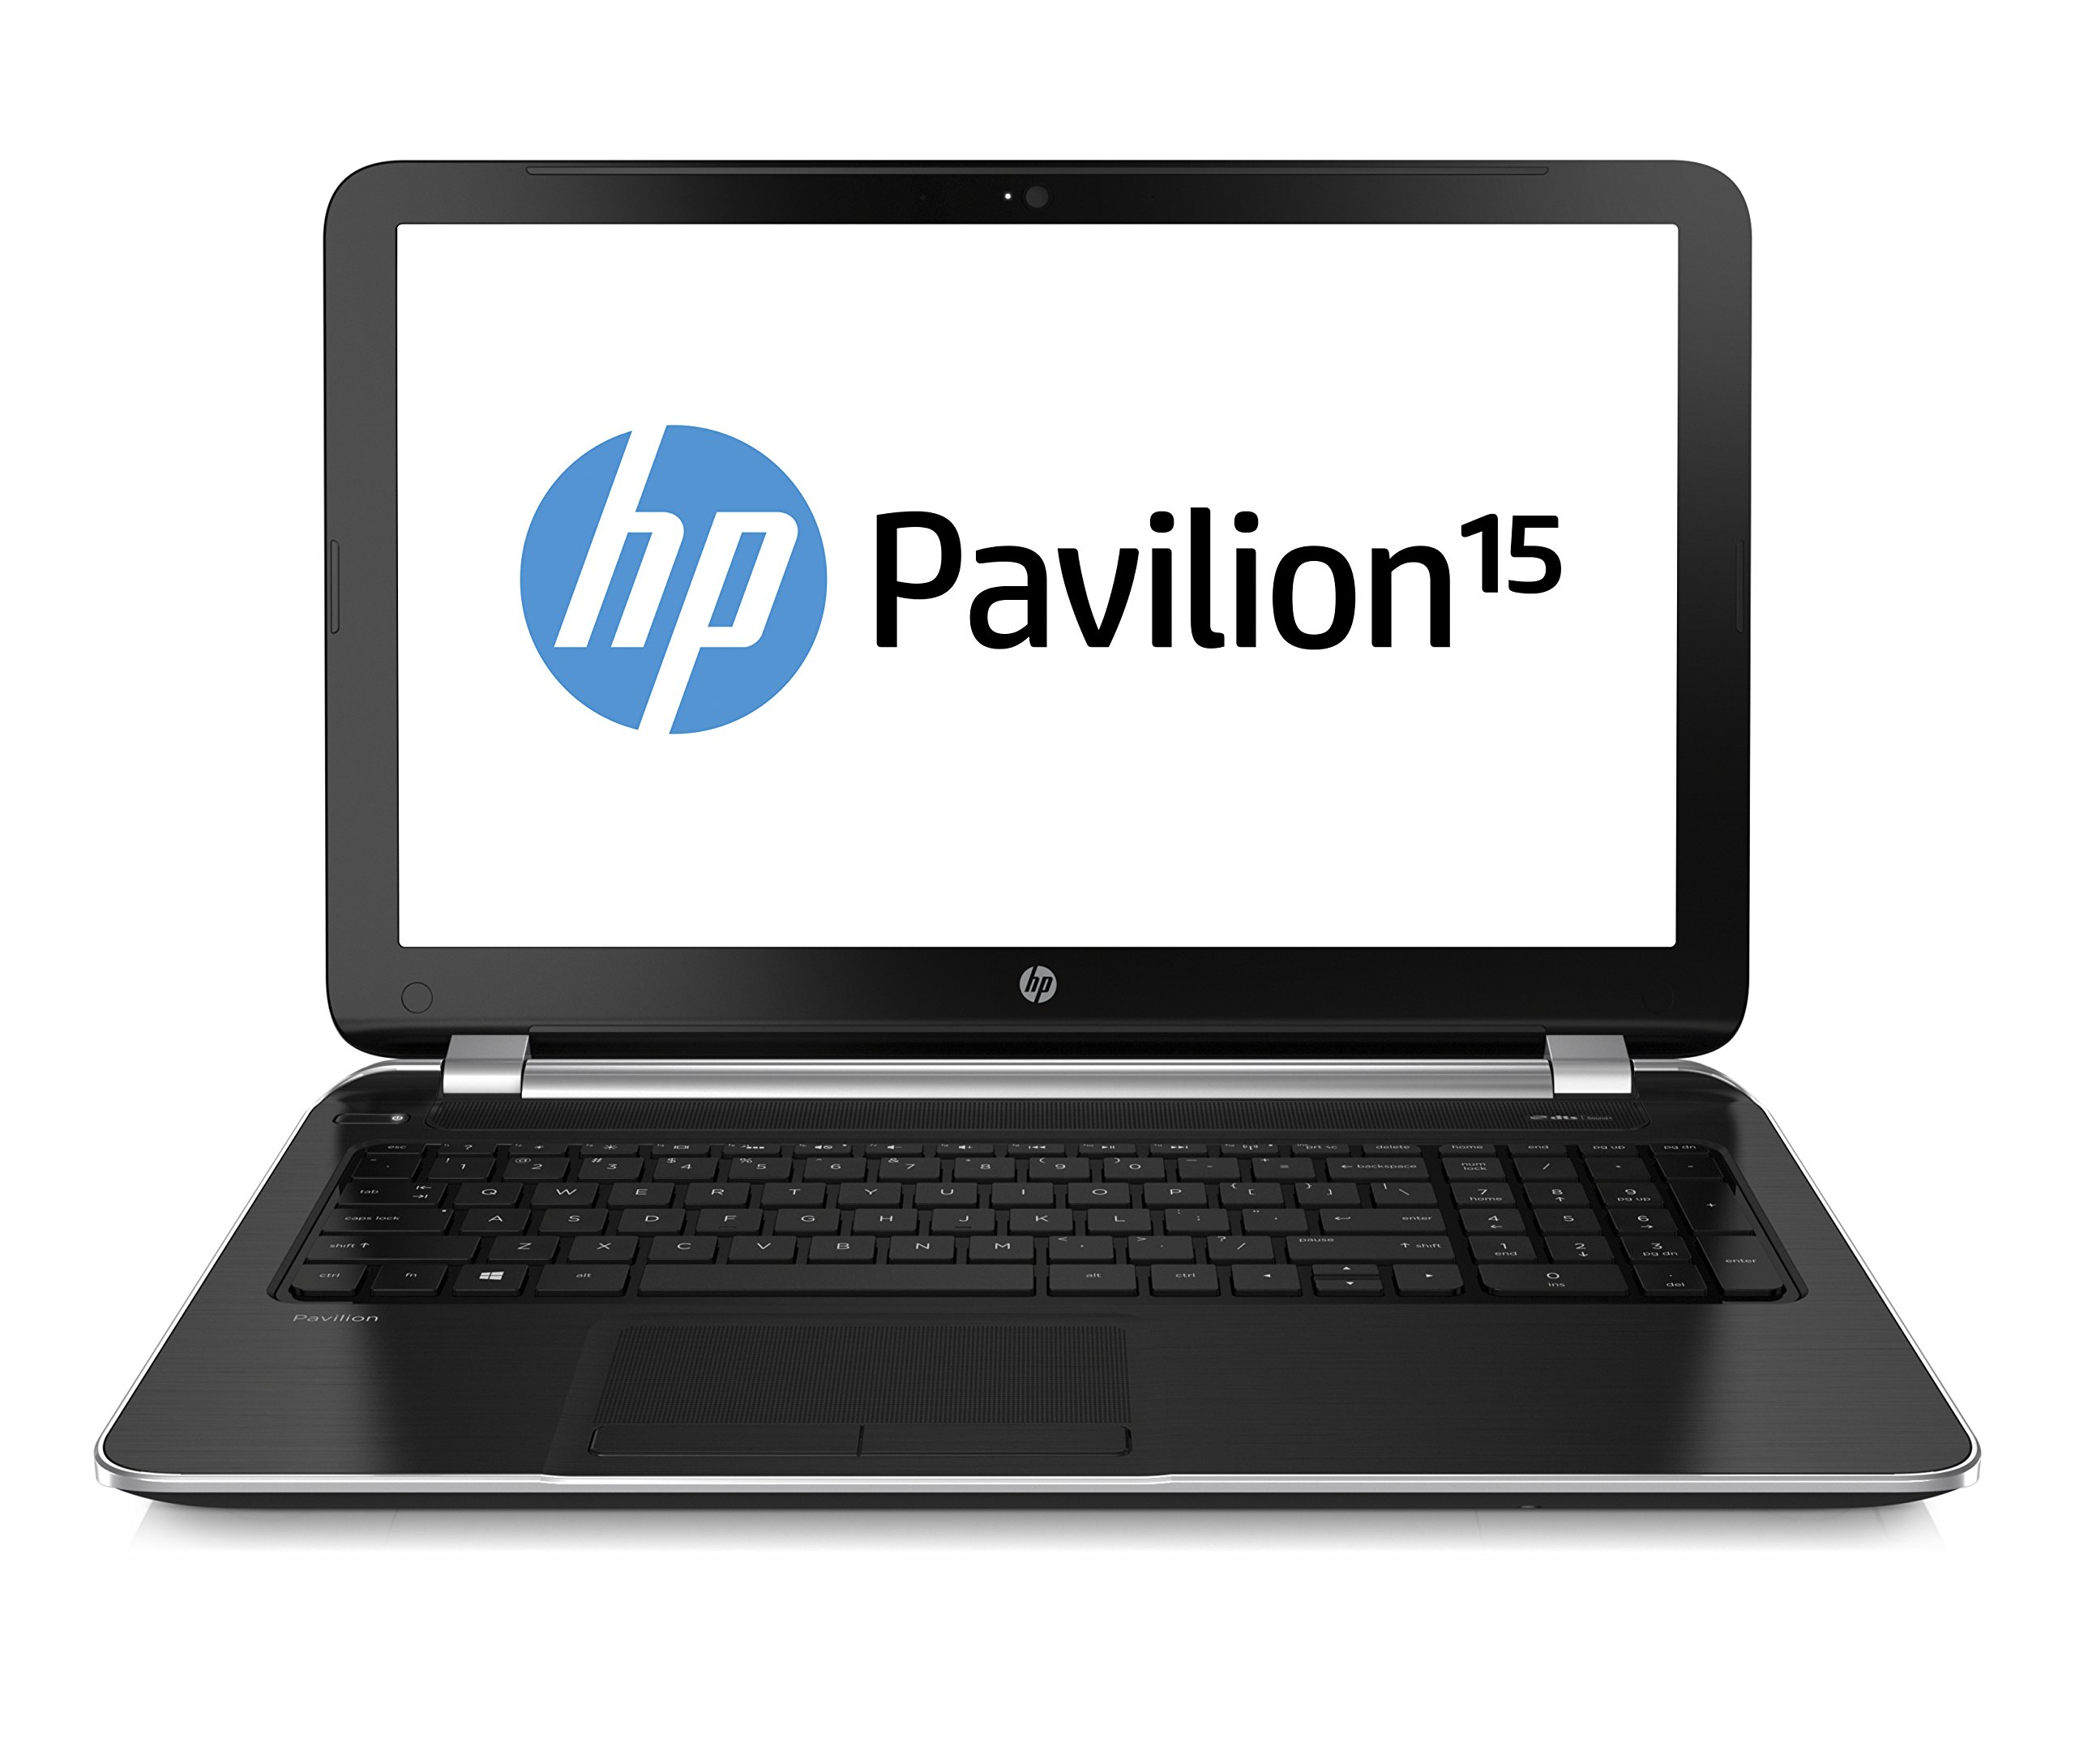 HP Pavilion 15-n200 15-n263nr 15.6in. LED (BrightView) Notebook - Intel Core i5 i5-4200U Dual-core (2 Core) 1.60 GHz - Mineral Black, Matte Sandblasted